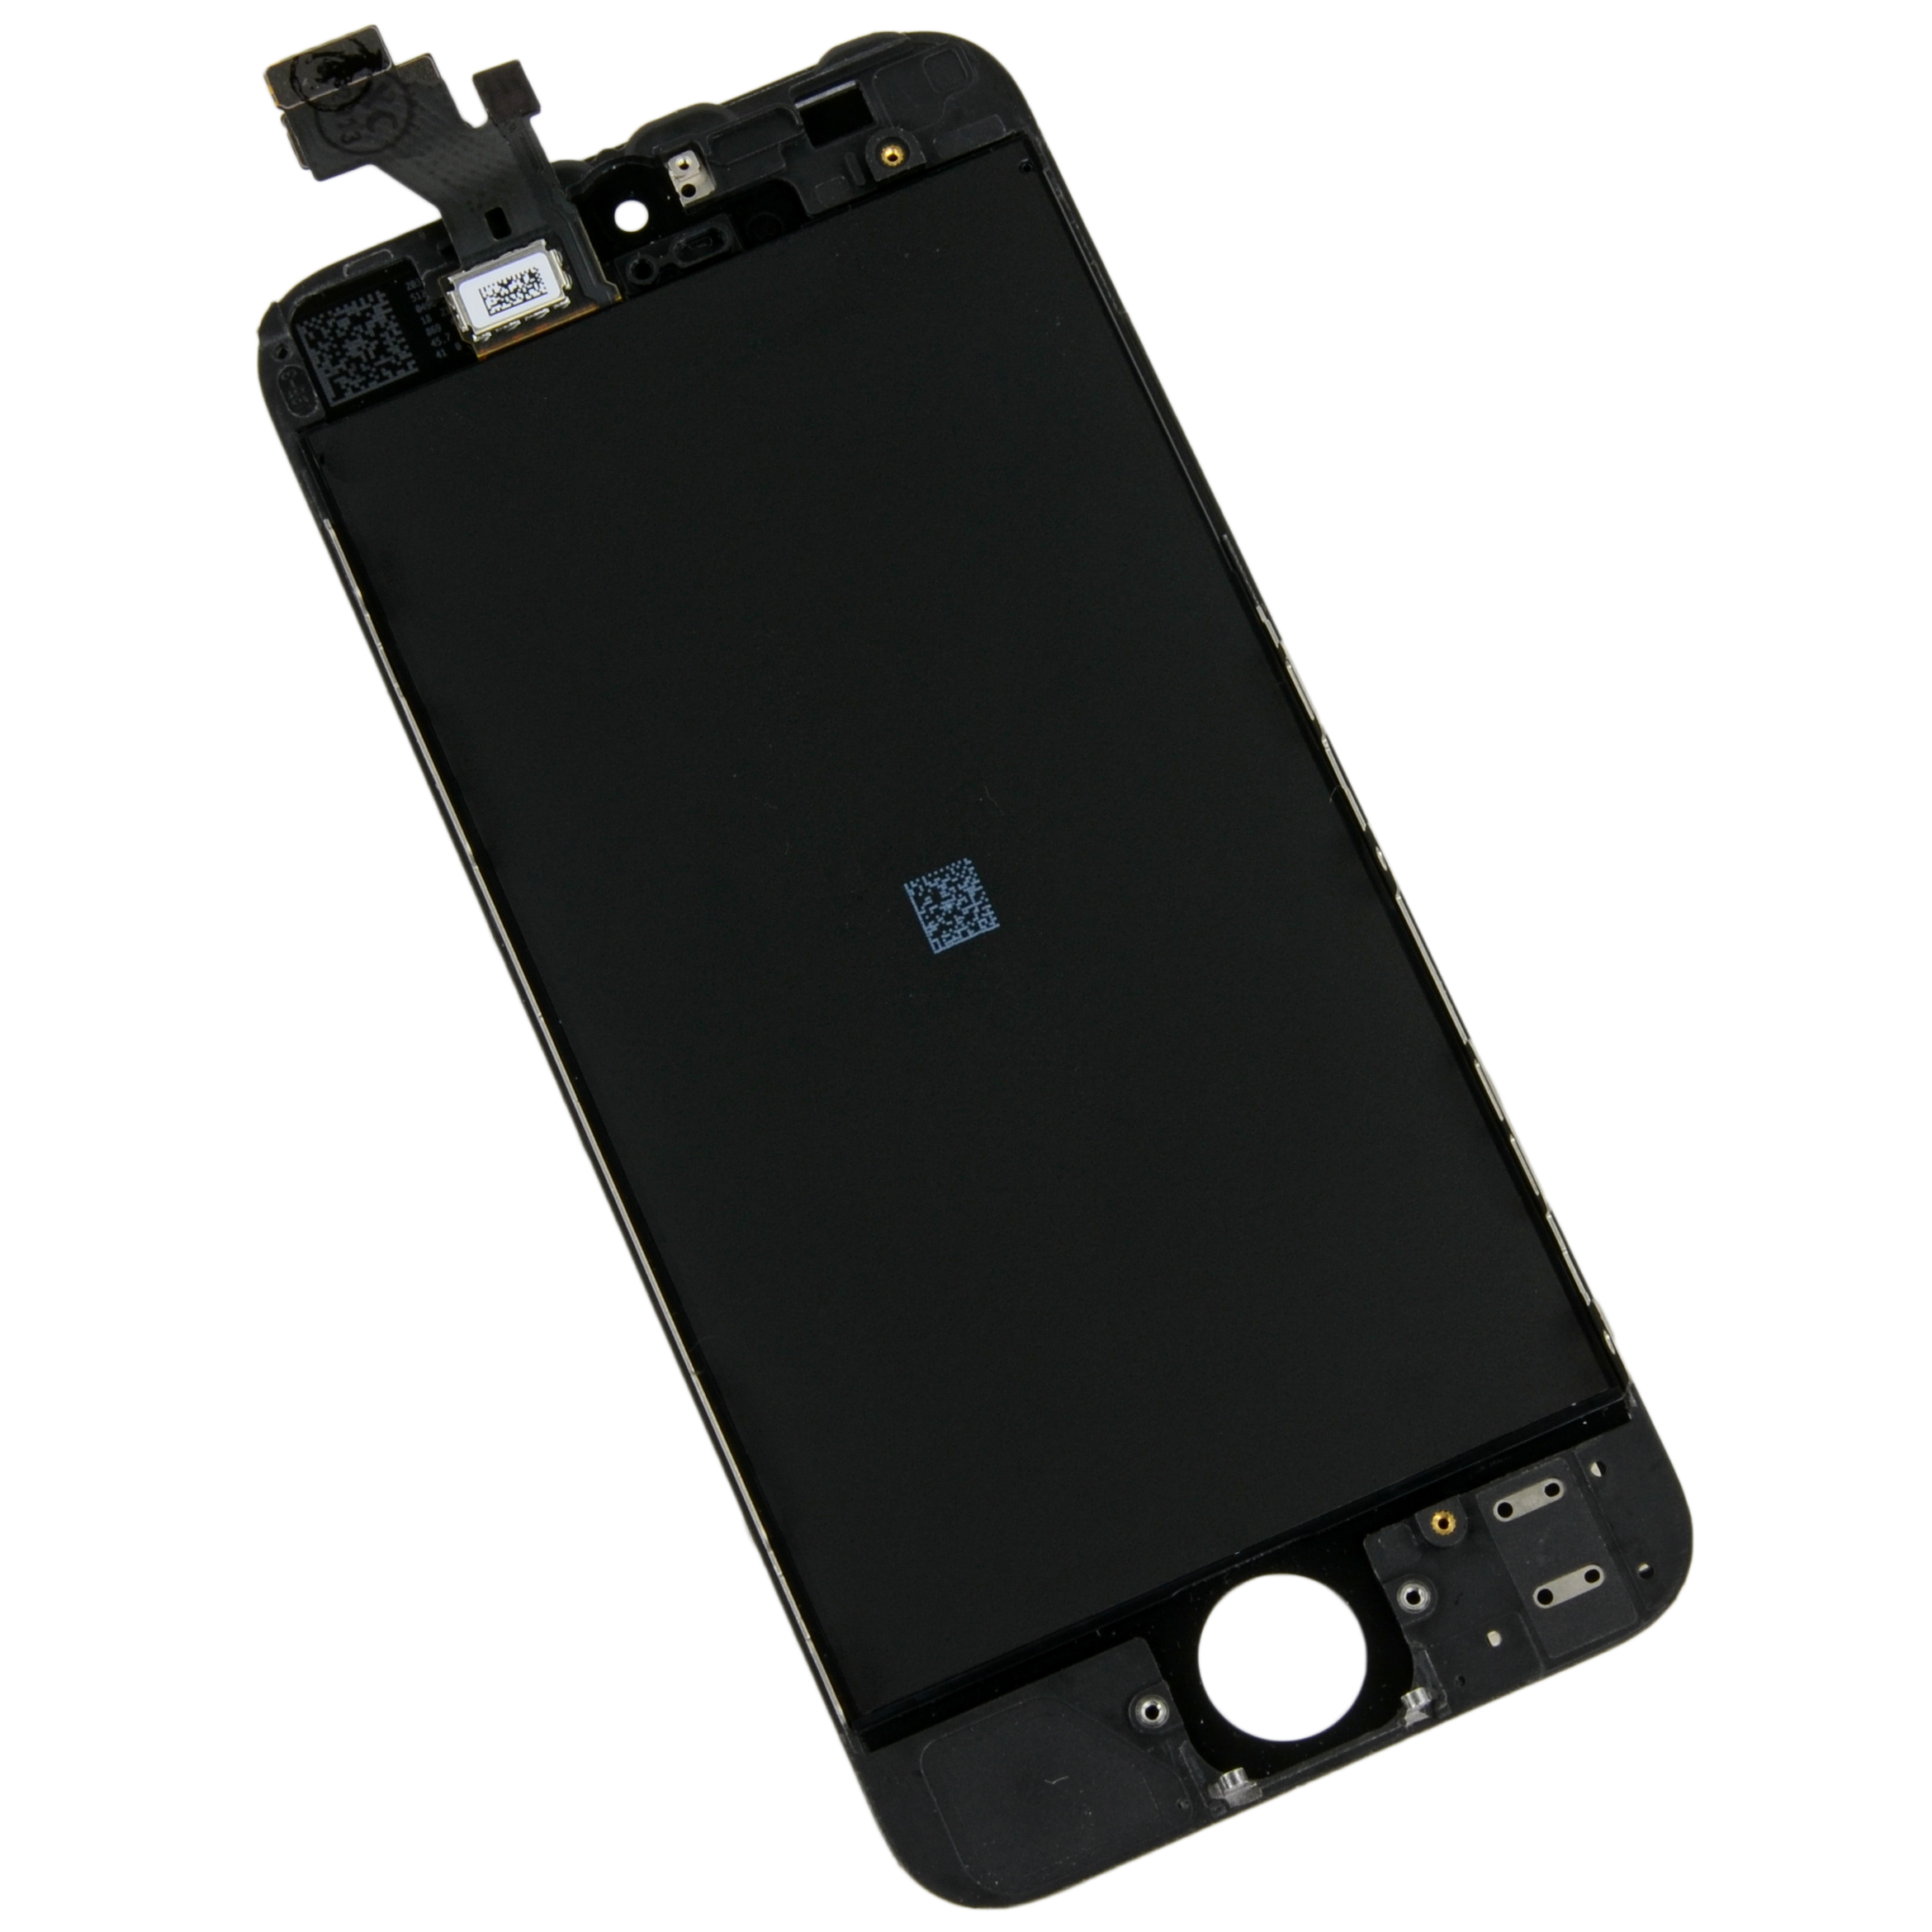 iPhone 5 (iFixit display assembly)